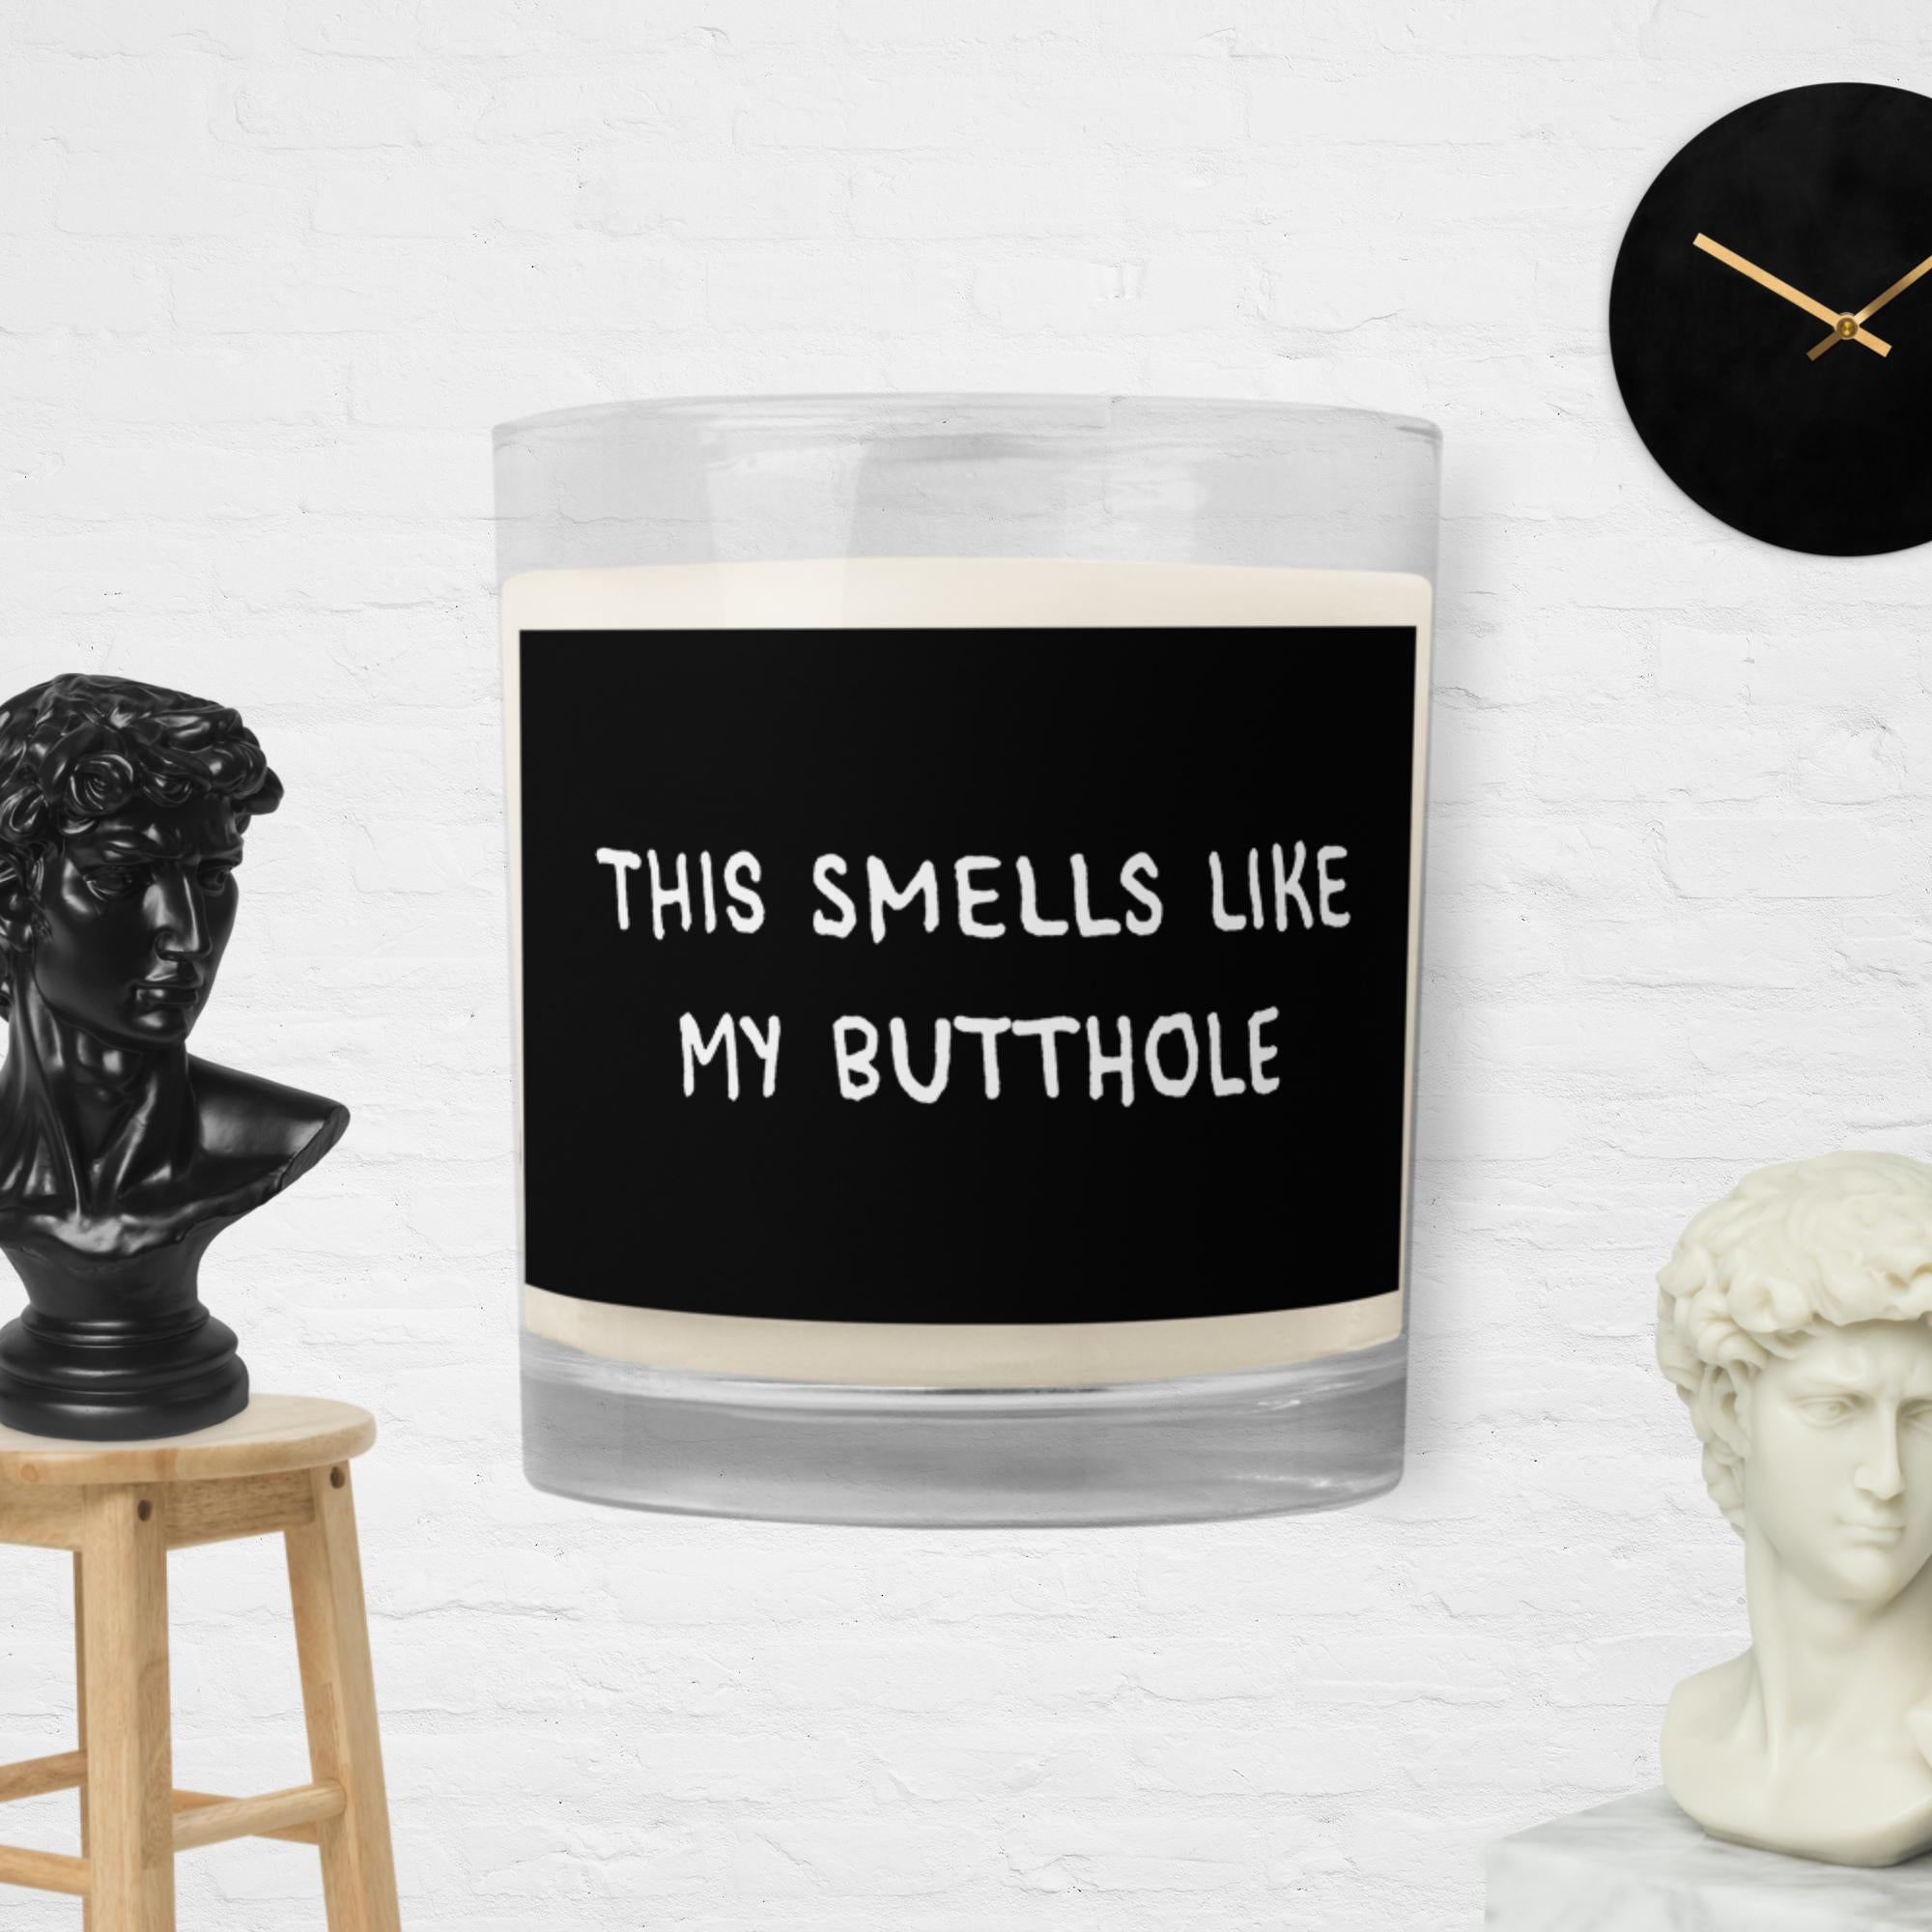 Smells Like My Butthole - Glass jar soy wax candle - Liners Gone Wild